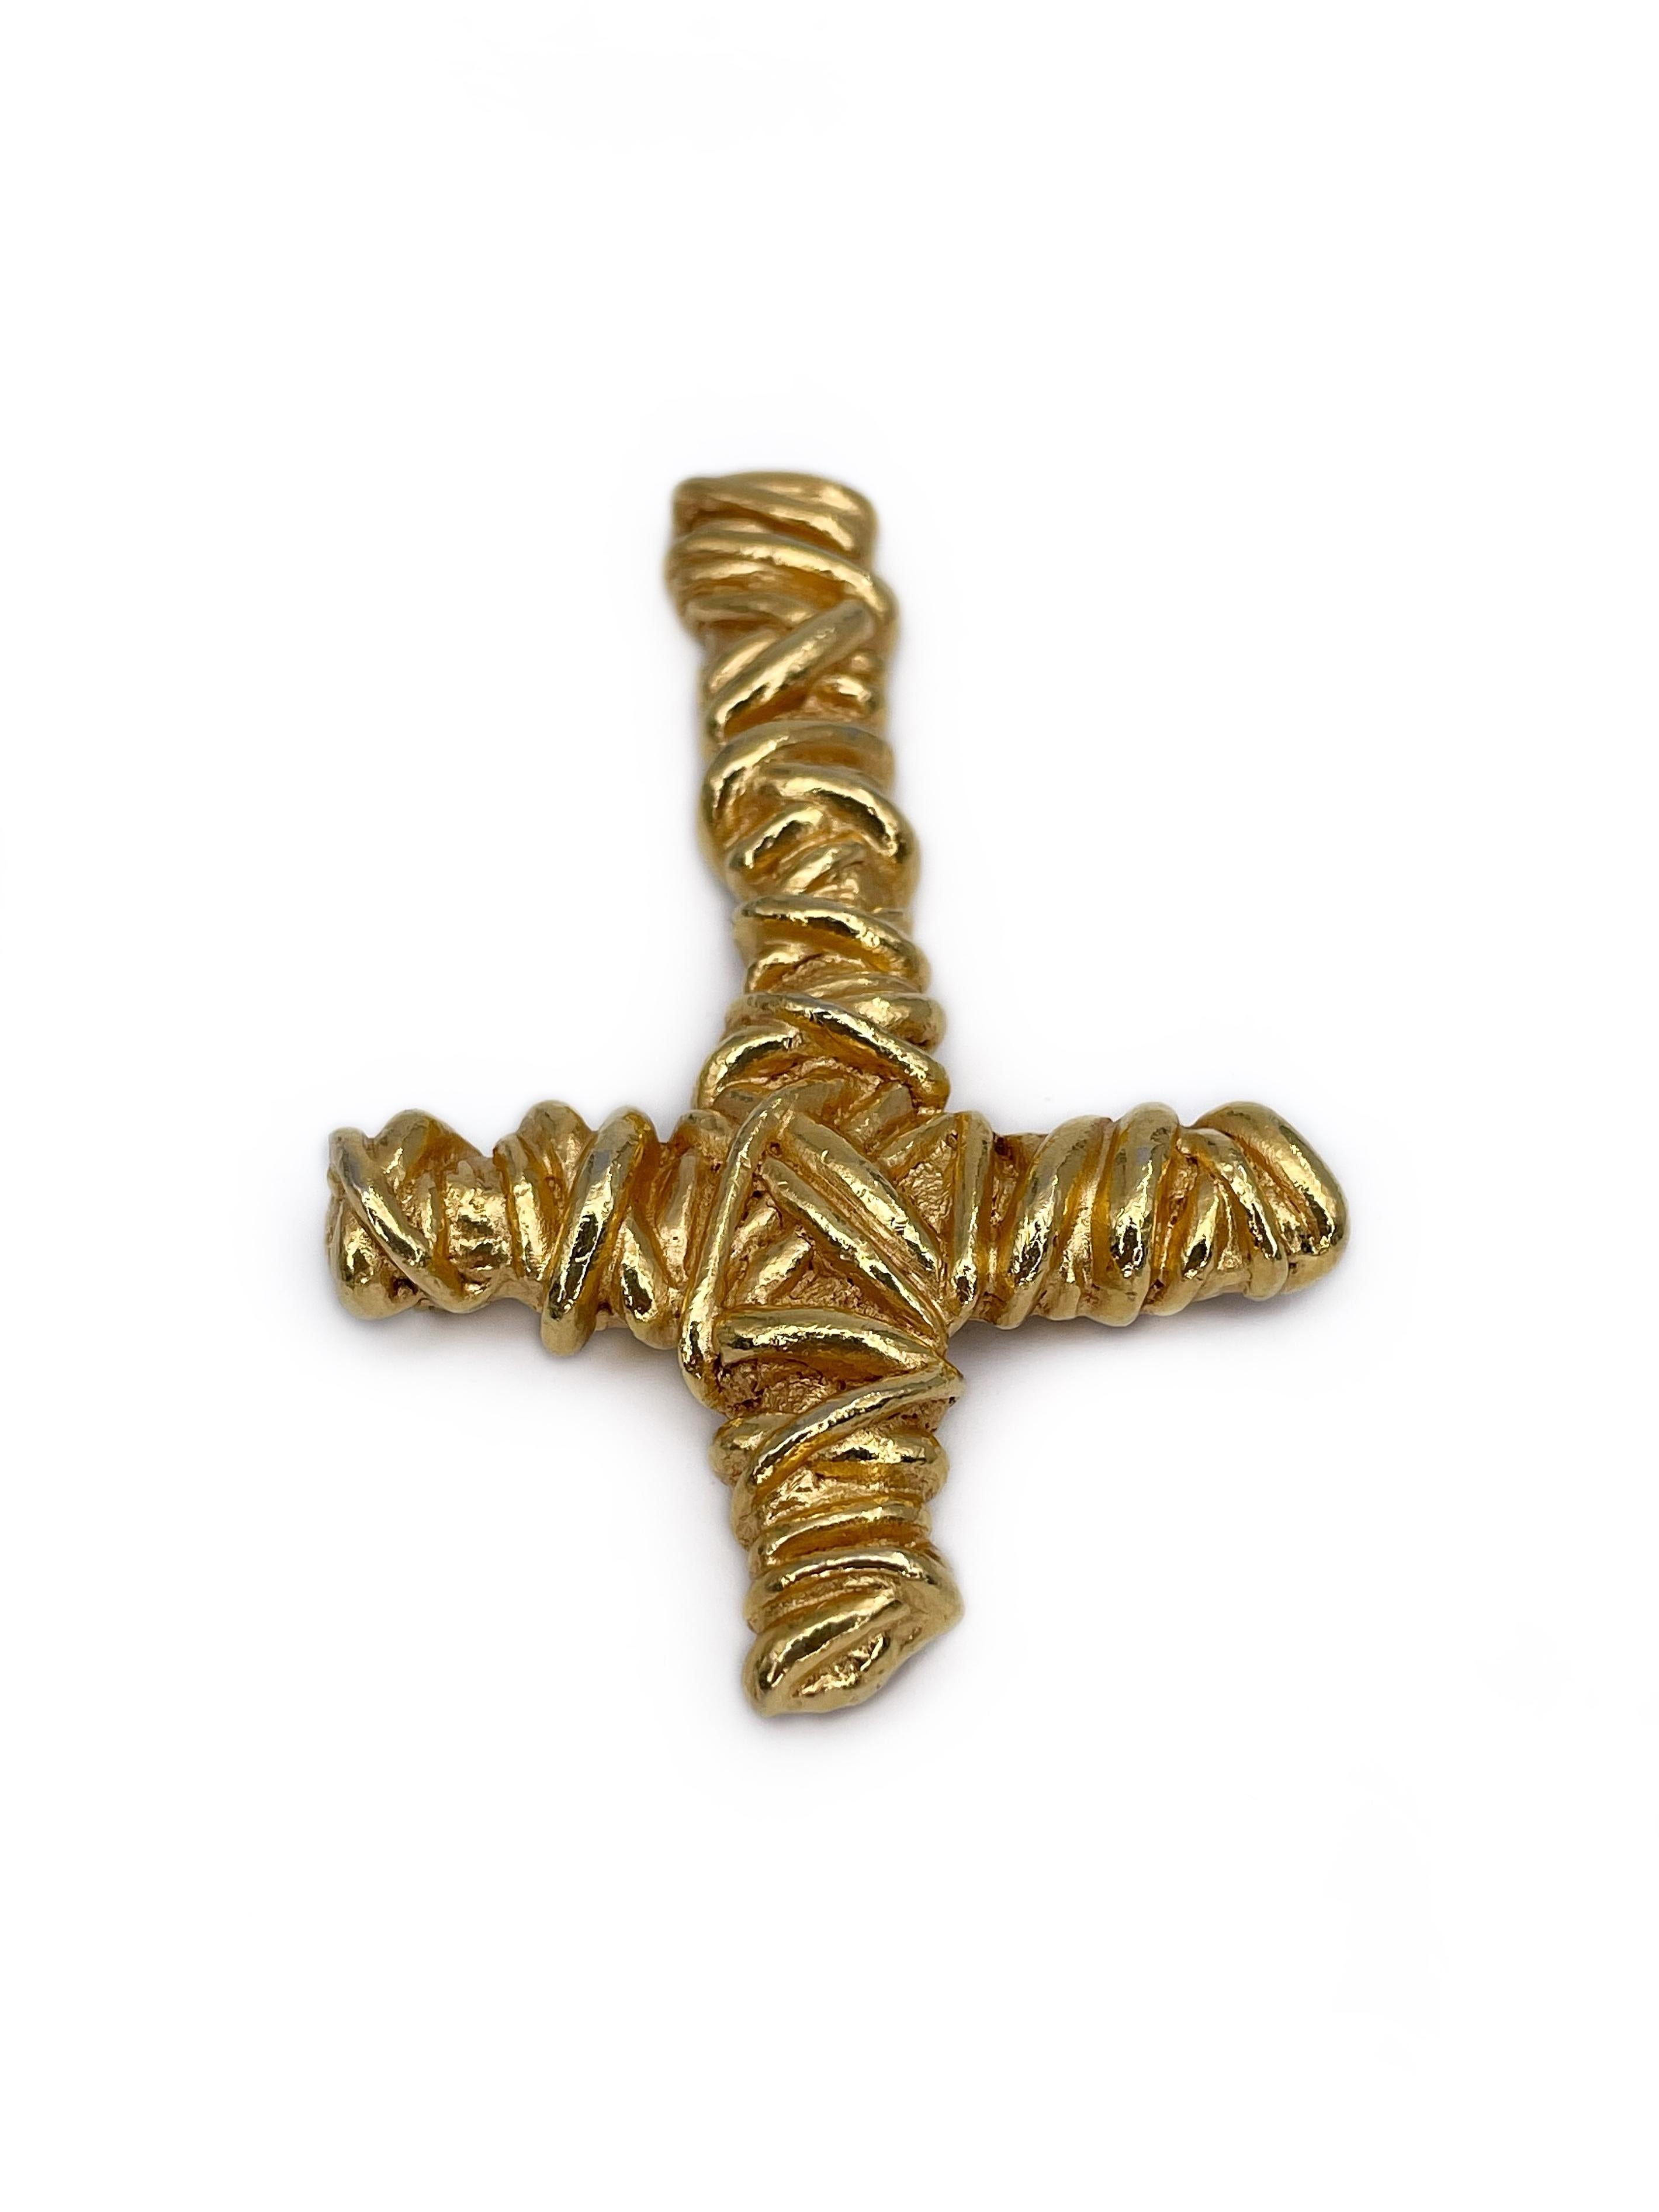 Modern 1994 Vintage Christian Lacroix Gold Tone Cross Pin Brooch For Sale